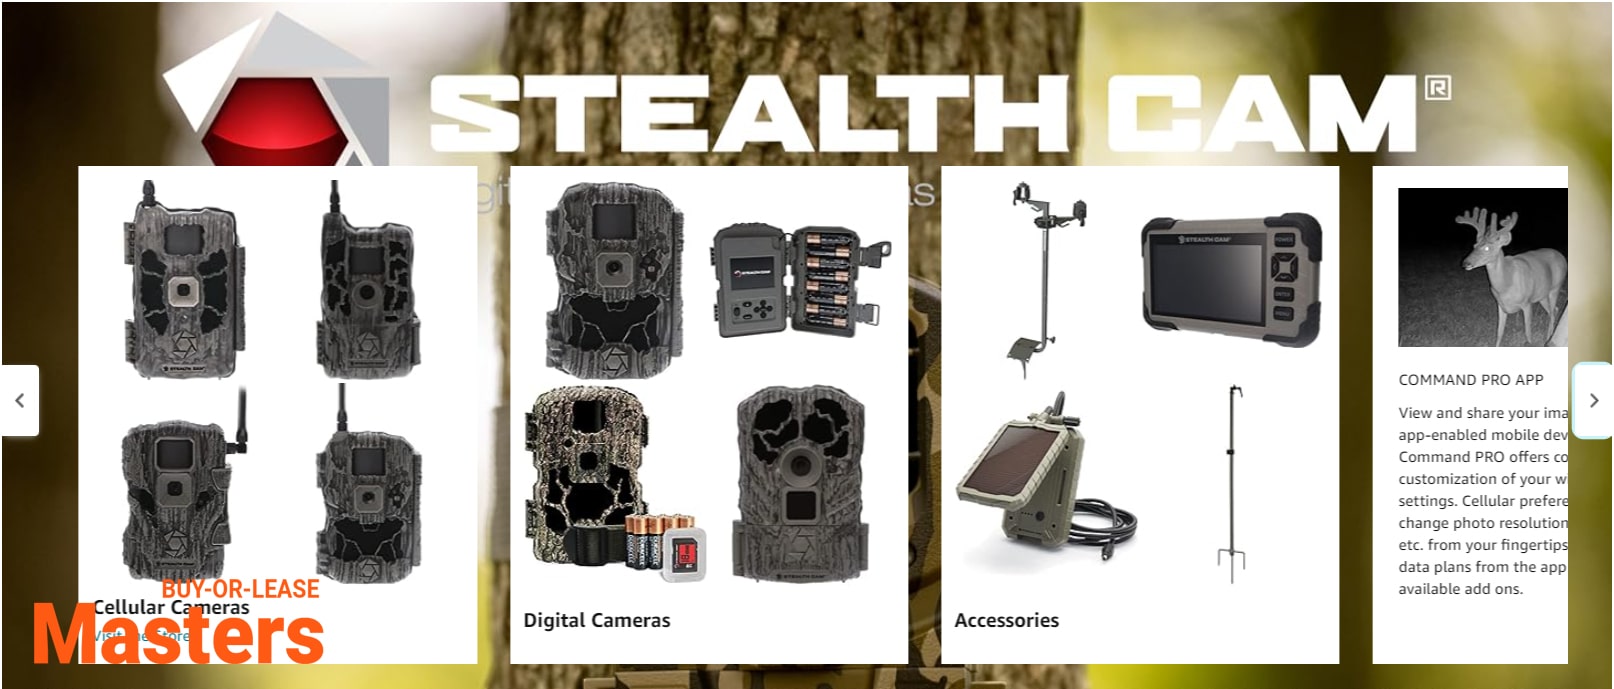 stealth-x-pro-cellular-trail-cameras-content (6)